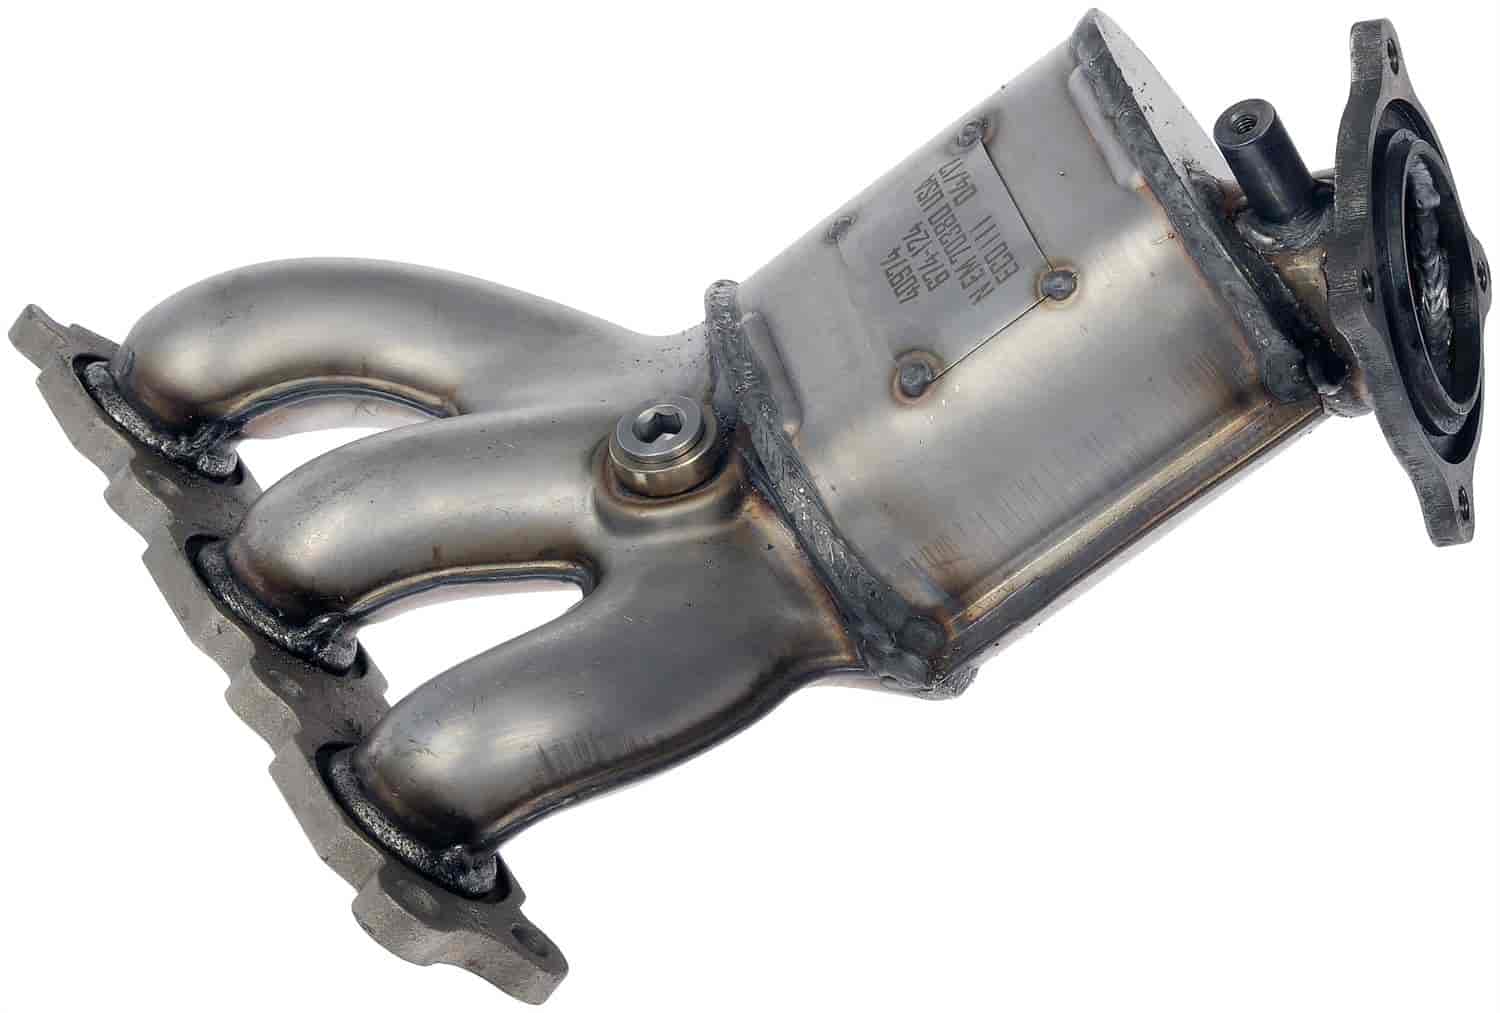 Manifold Converter Not Carb Compliant Not For Legal Sale In Ny Ca